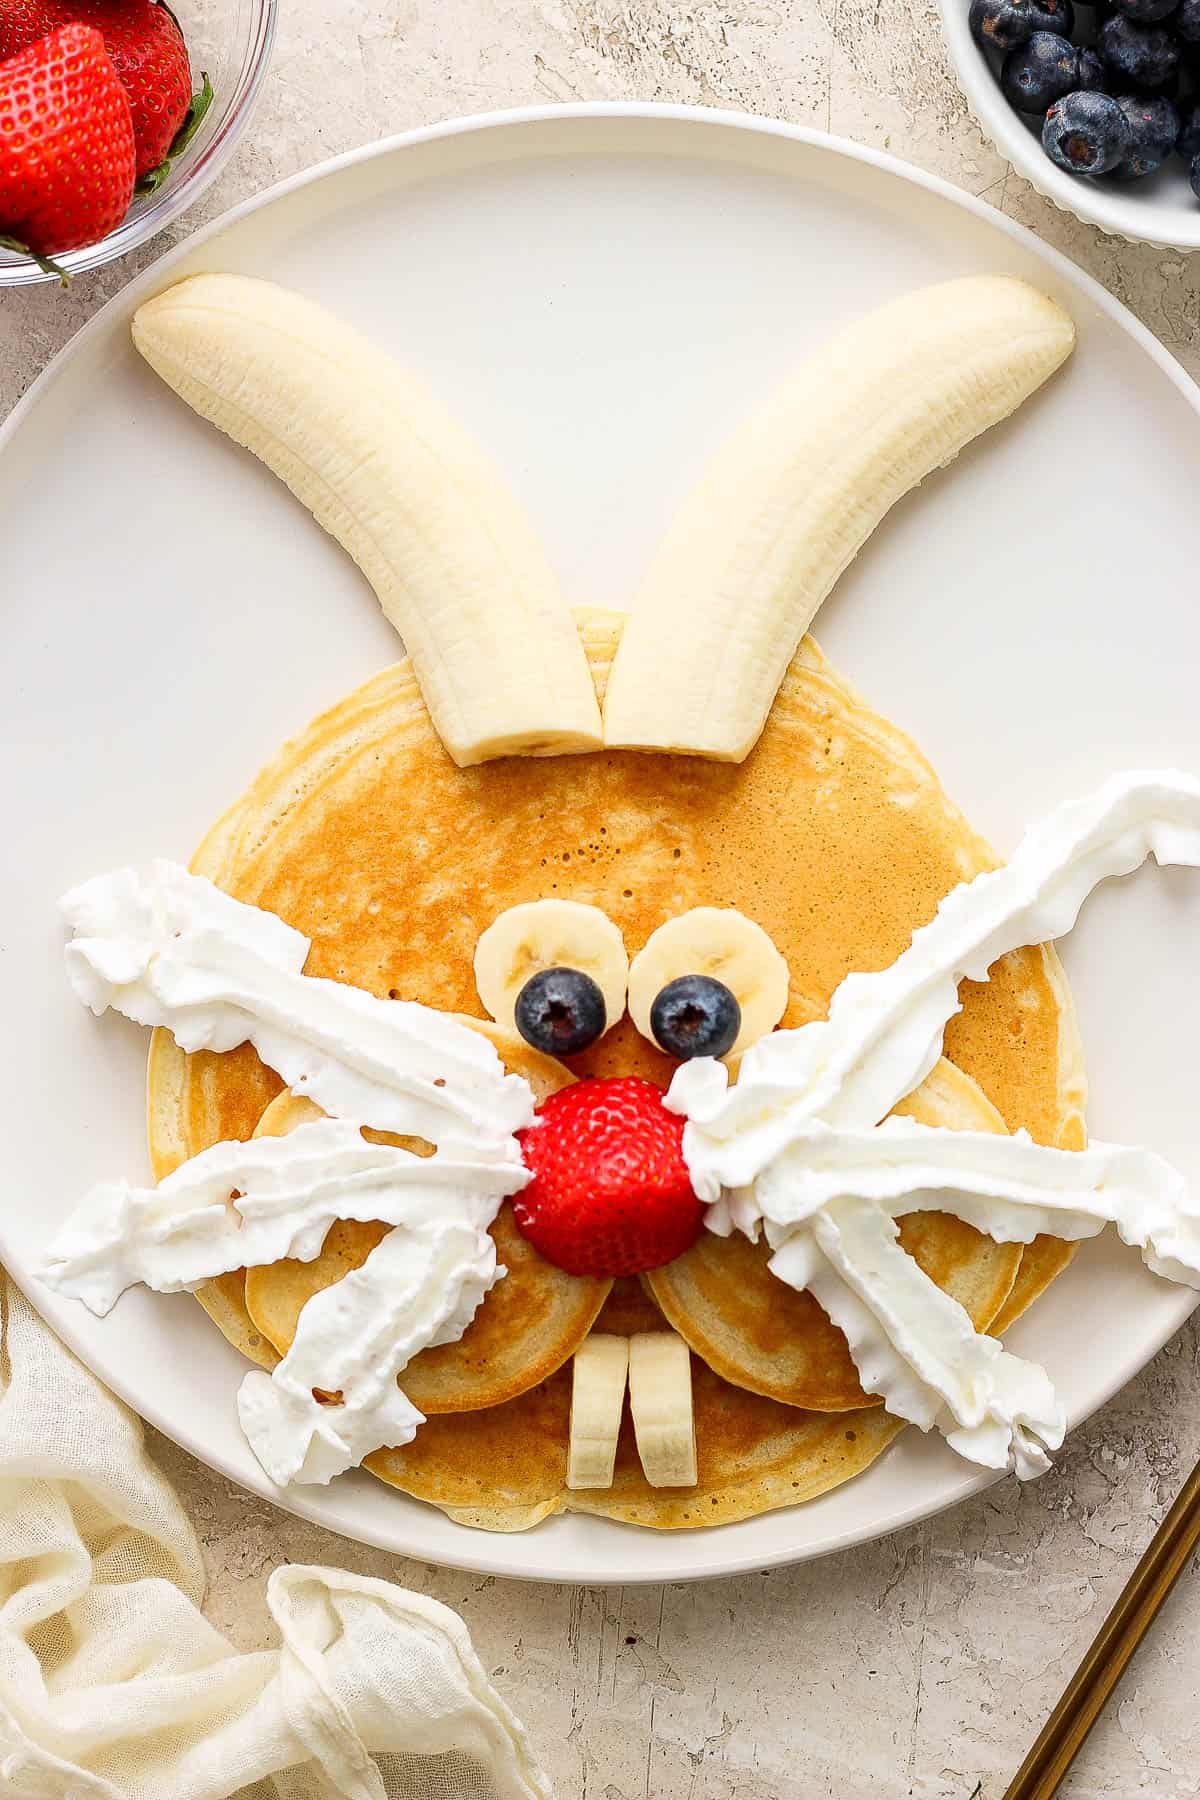 A bunny pancake with whipped cream added as whiskers.